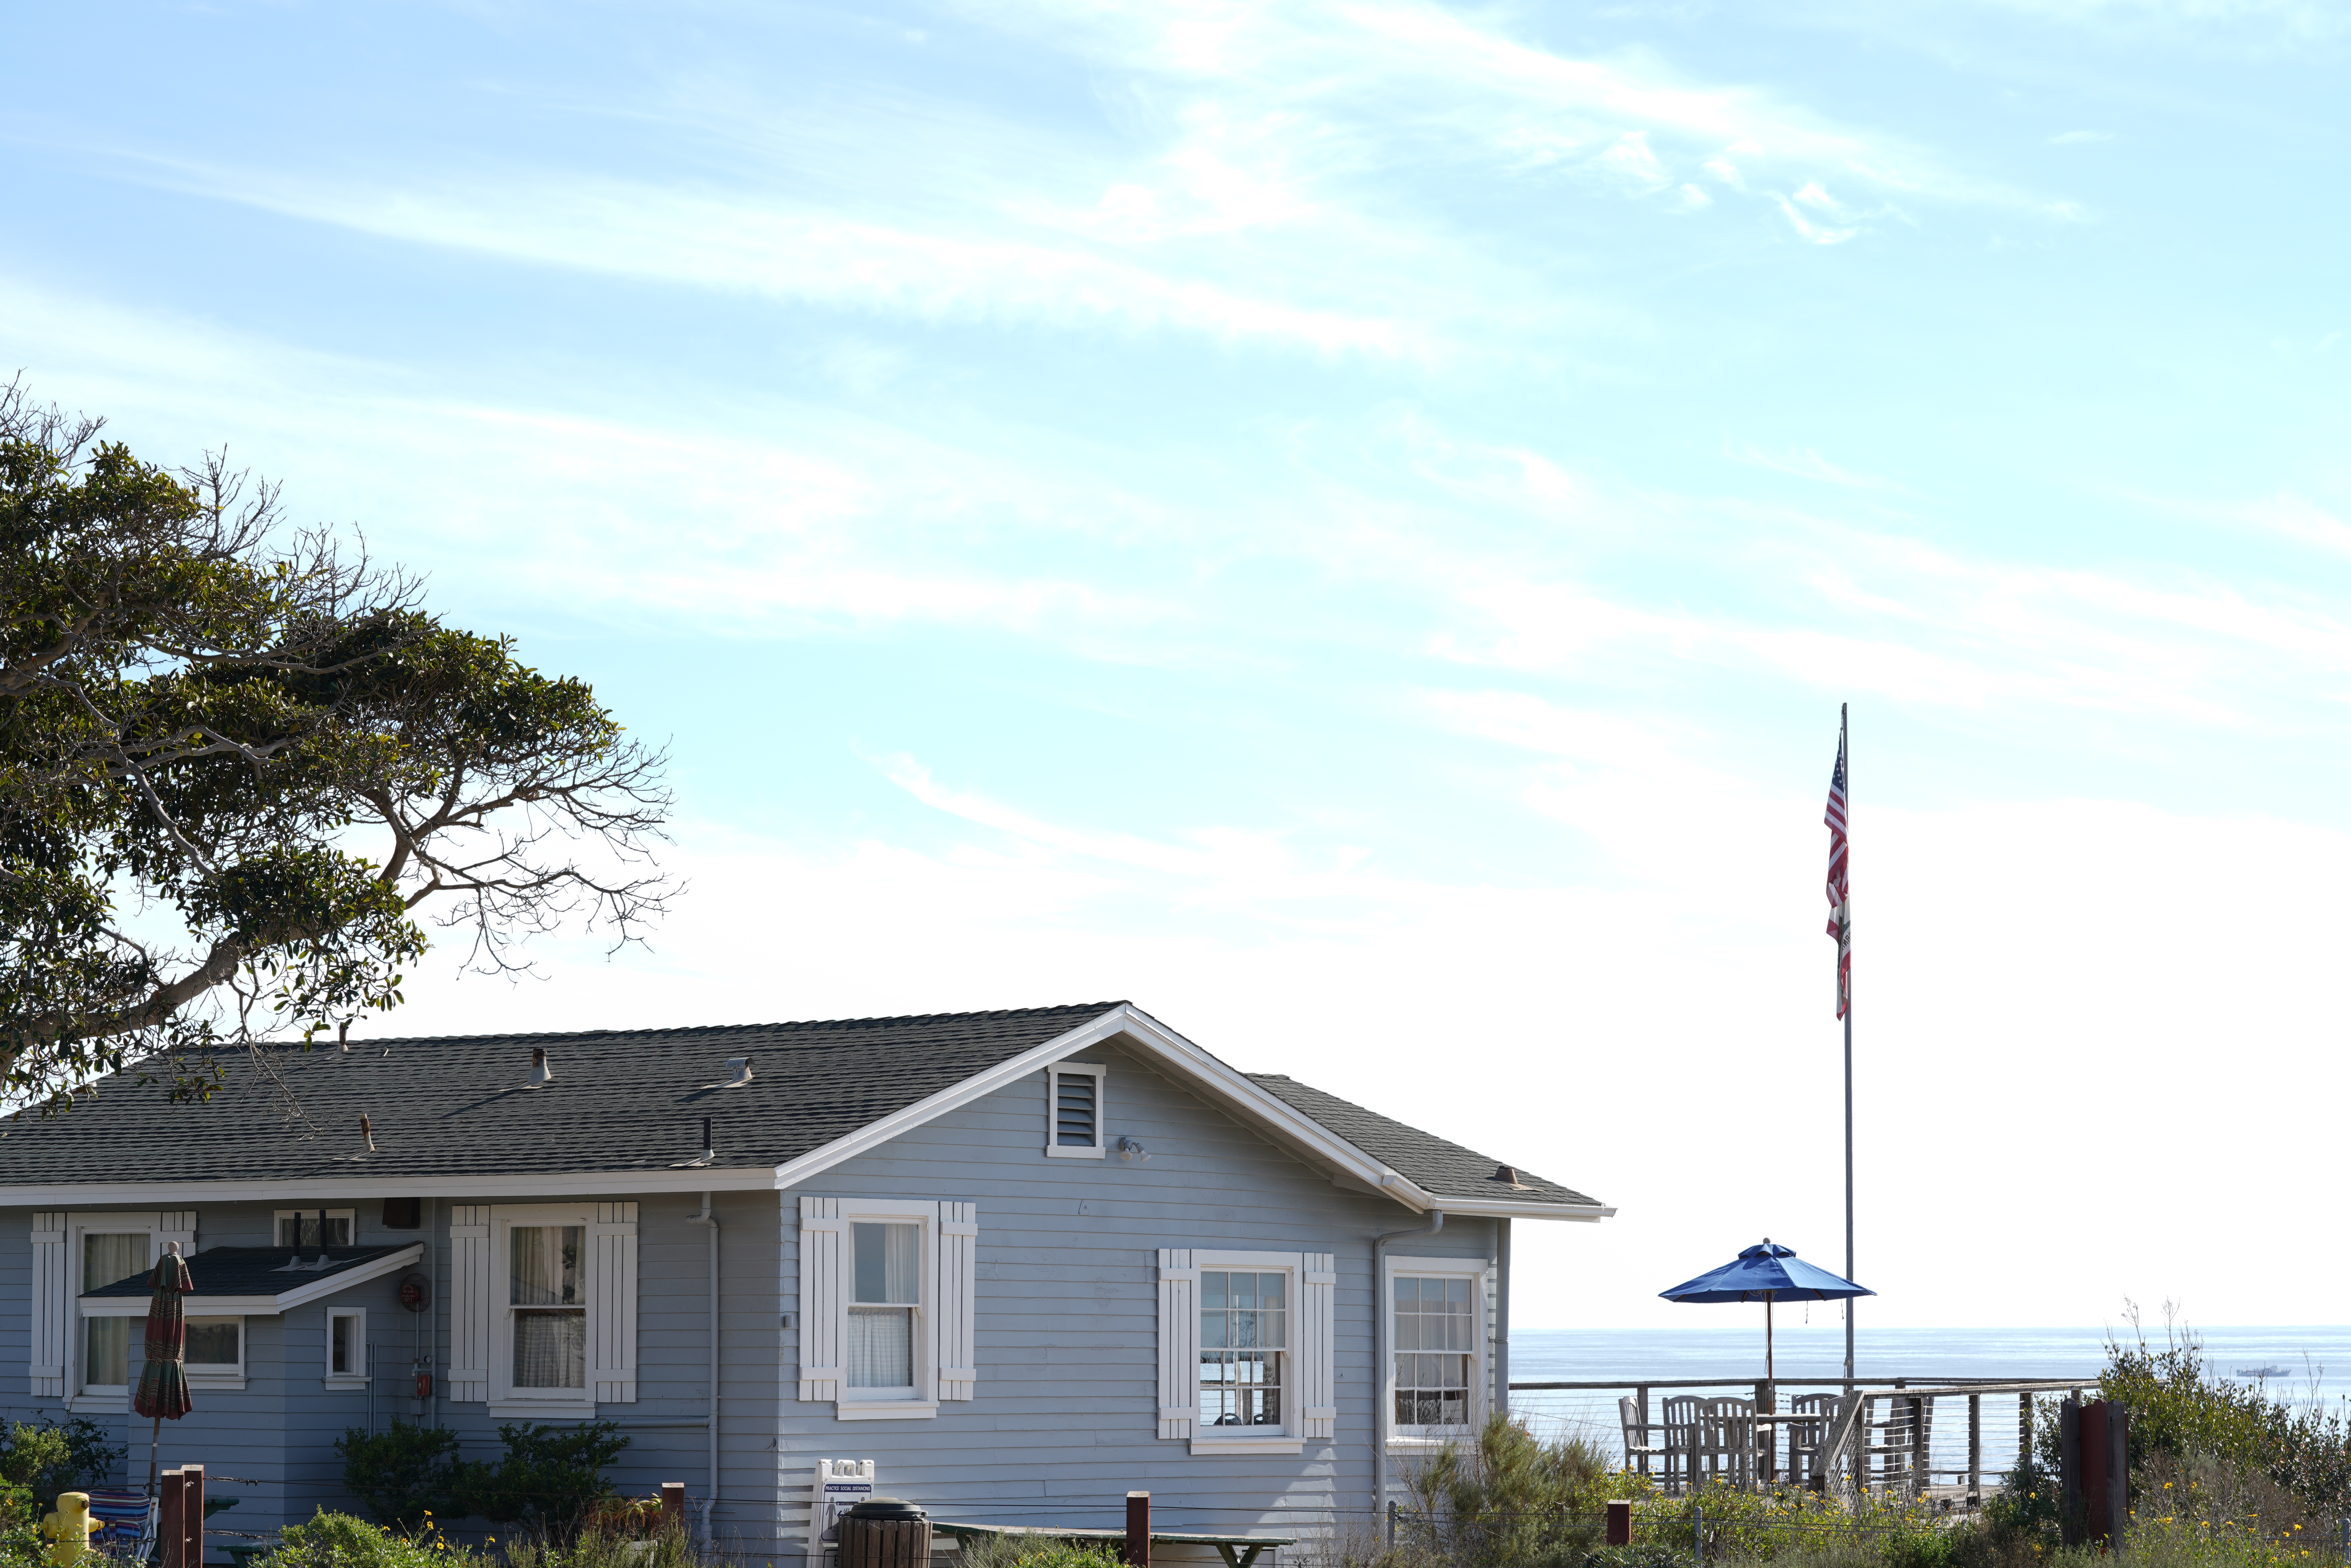 A photo of Cottage 34 at Crystal Cove State Beach, which was once used as a language school and community meeting place. It was moved to its present location sometime in the 1950s according to Clarence Nishizu.